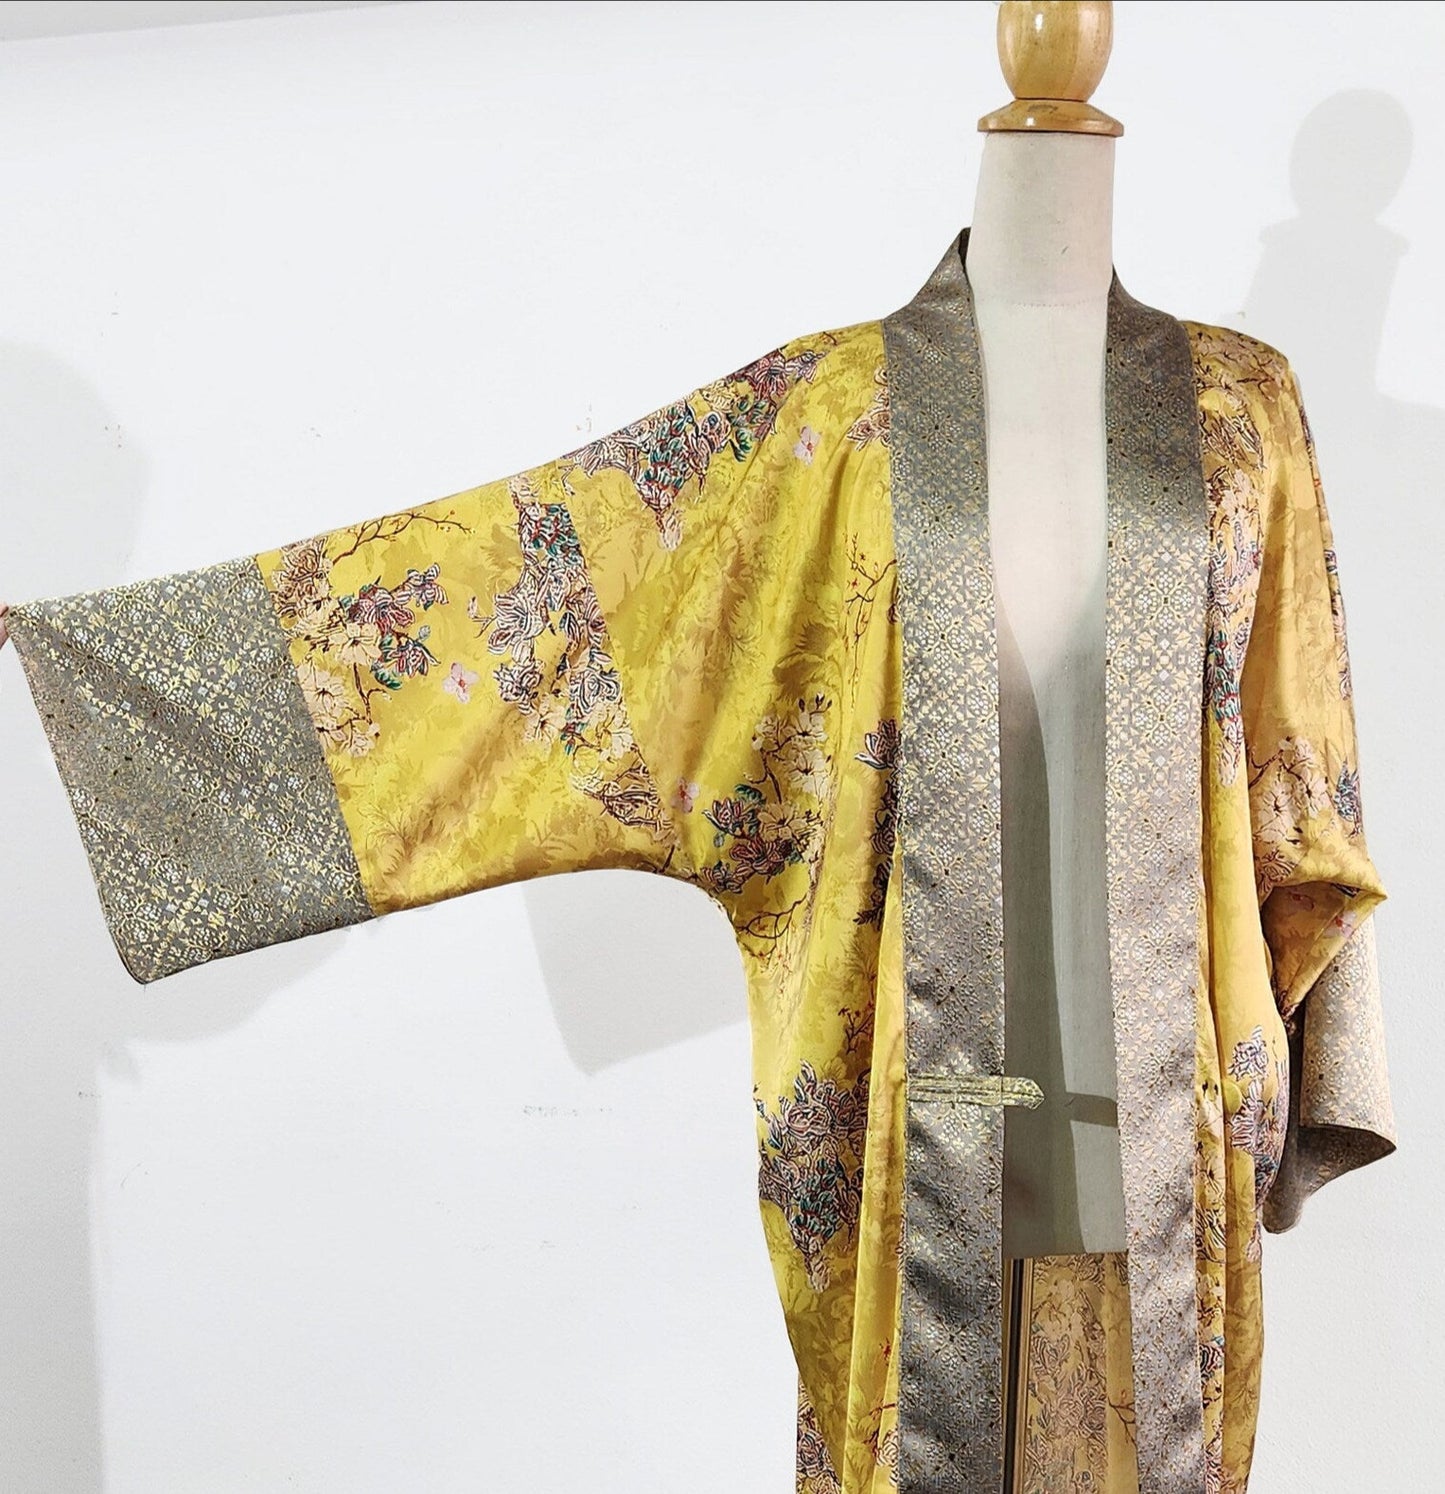 Kimono robe in printed yellow satin inspired by 1920s loungewear fashion, a Japanese golden robe